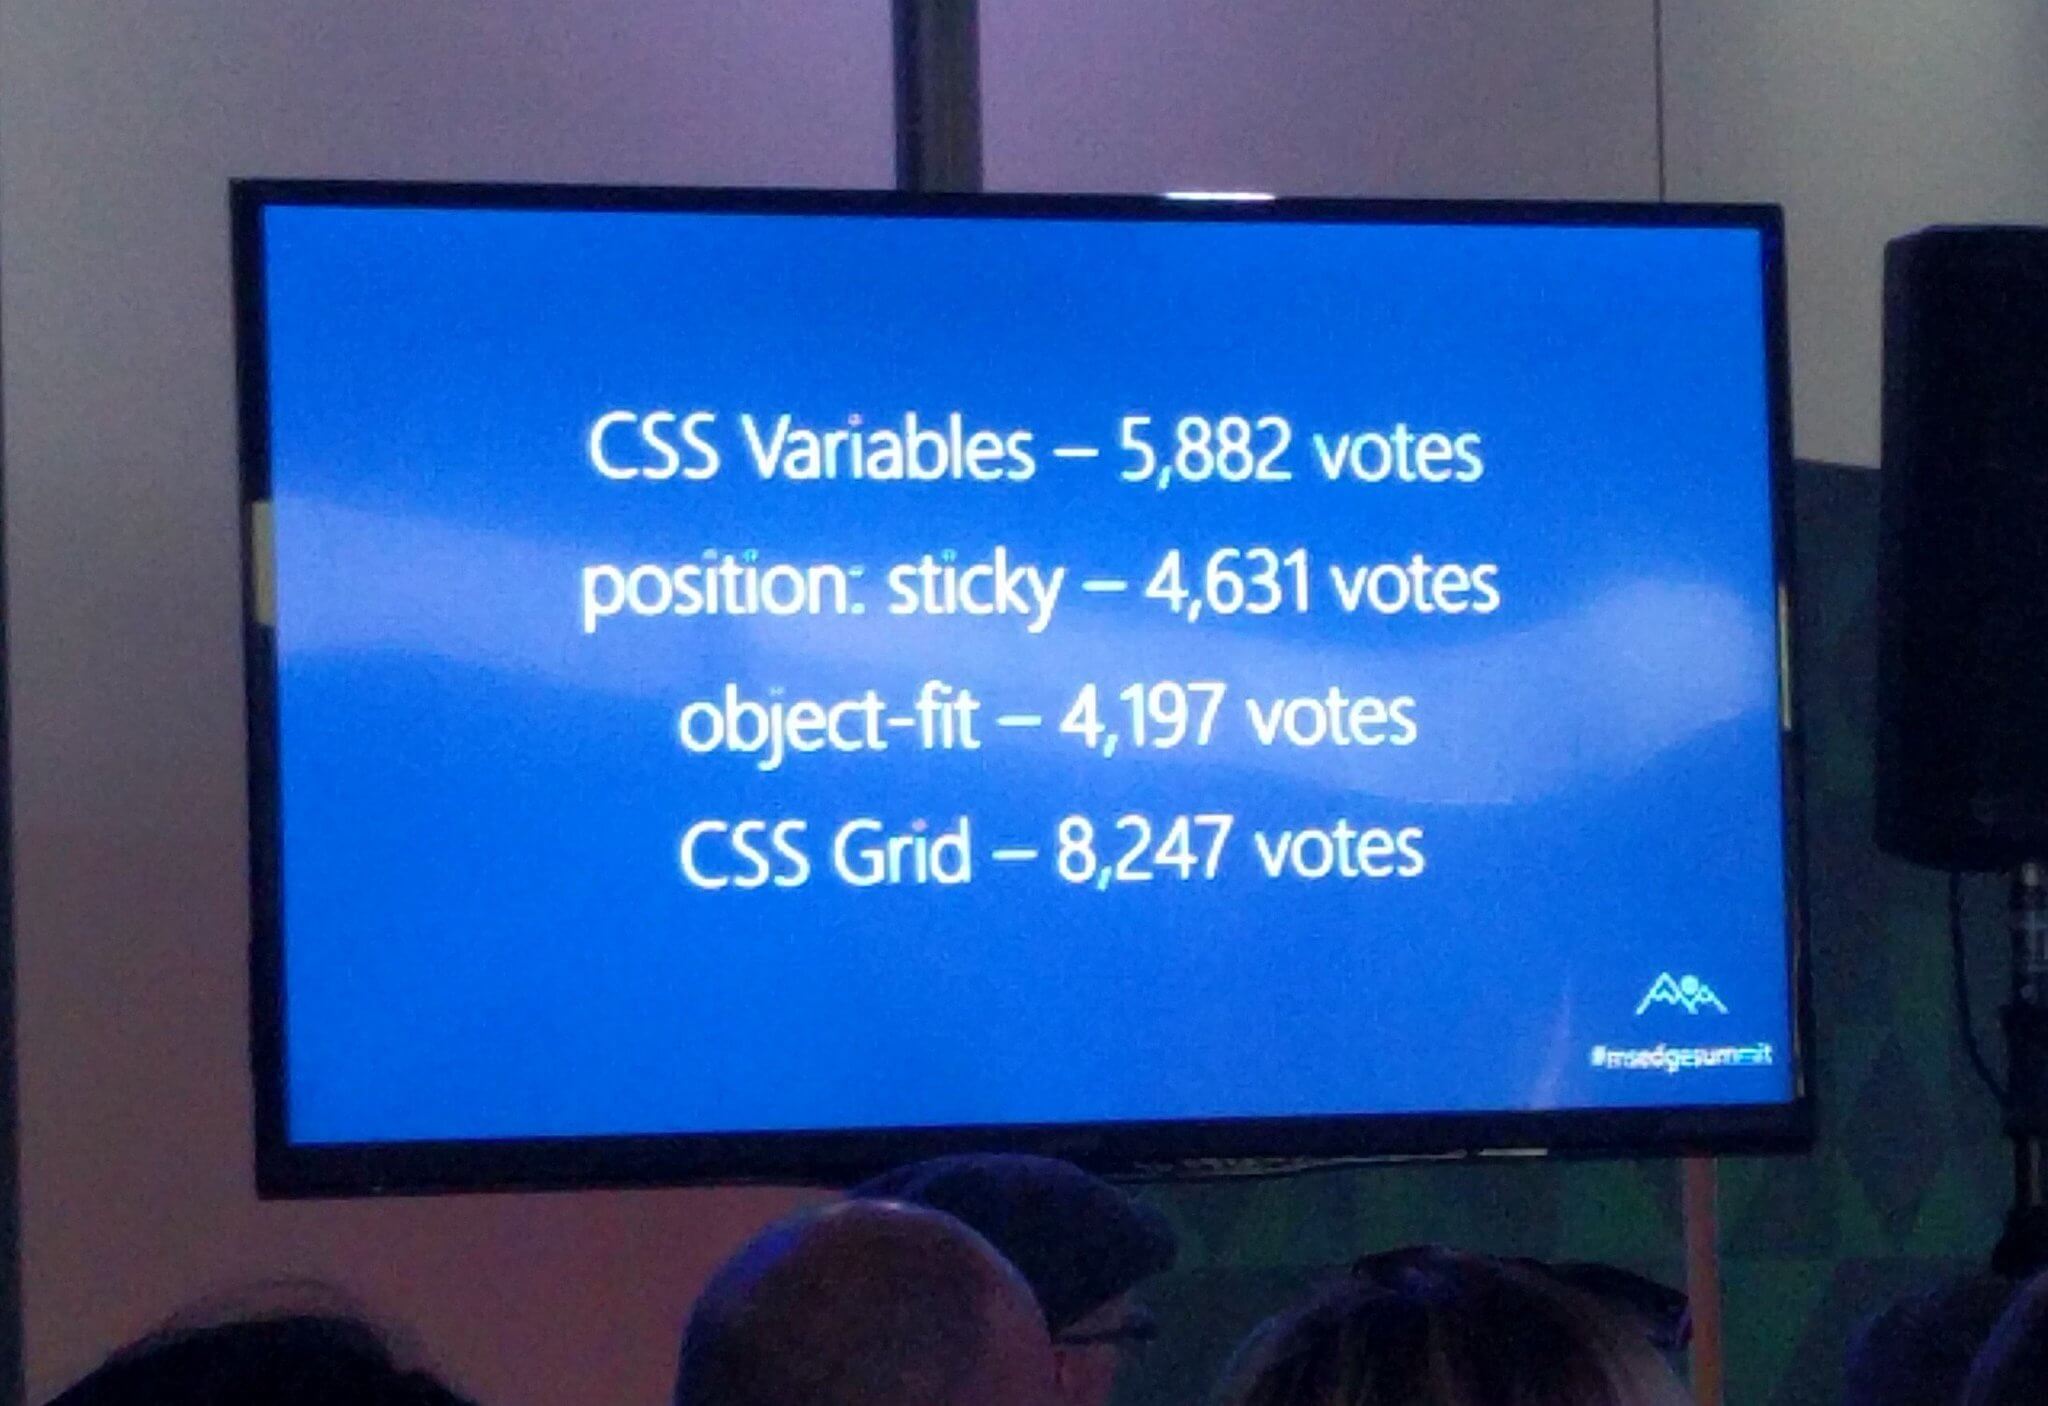 CSS variables — 5,882 votes. position: sticky — 4,631 votes. object-fit — 4,197 votes. CSS grid — 8,247 votes.